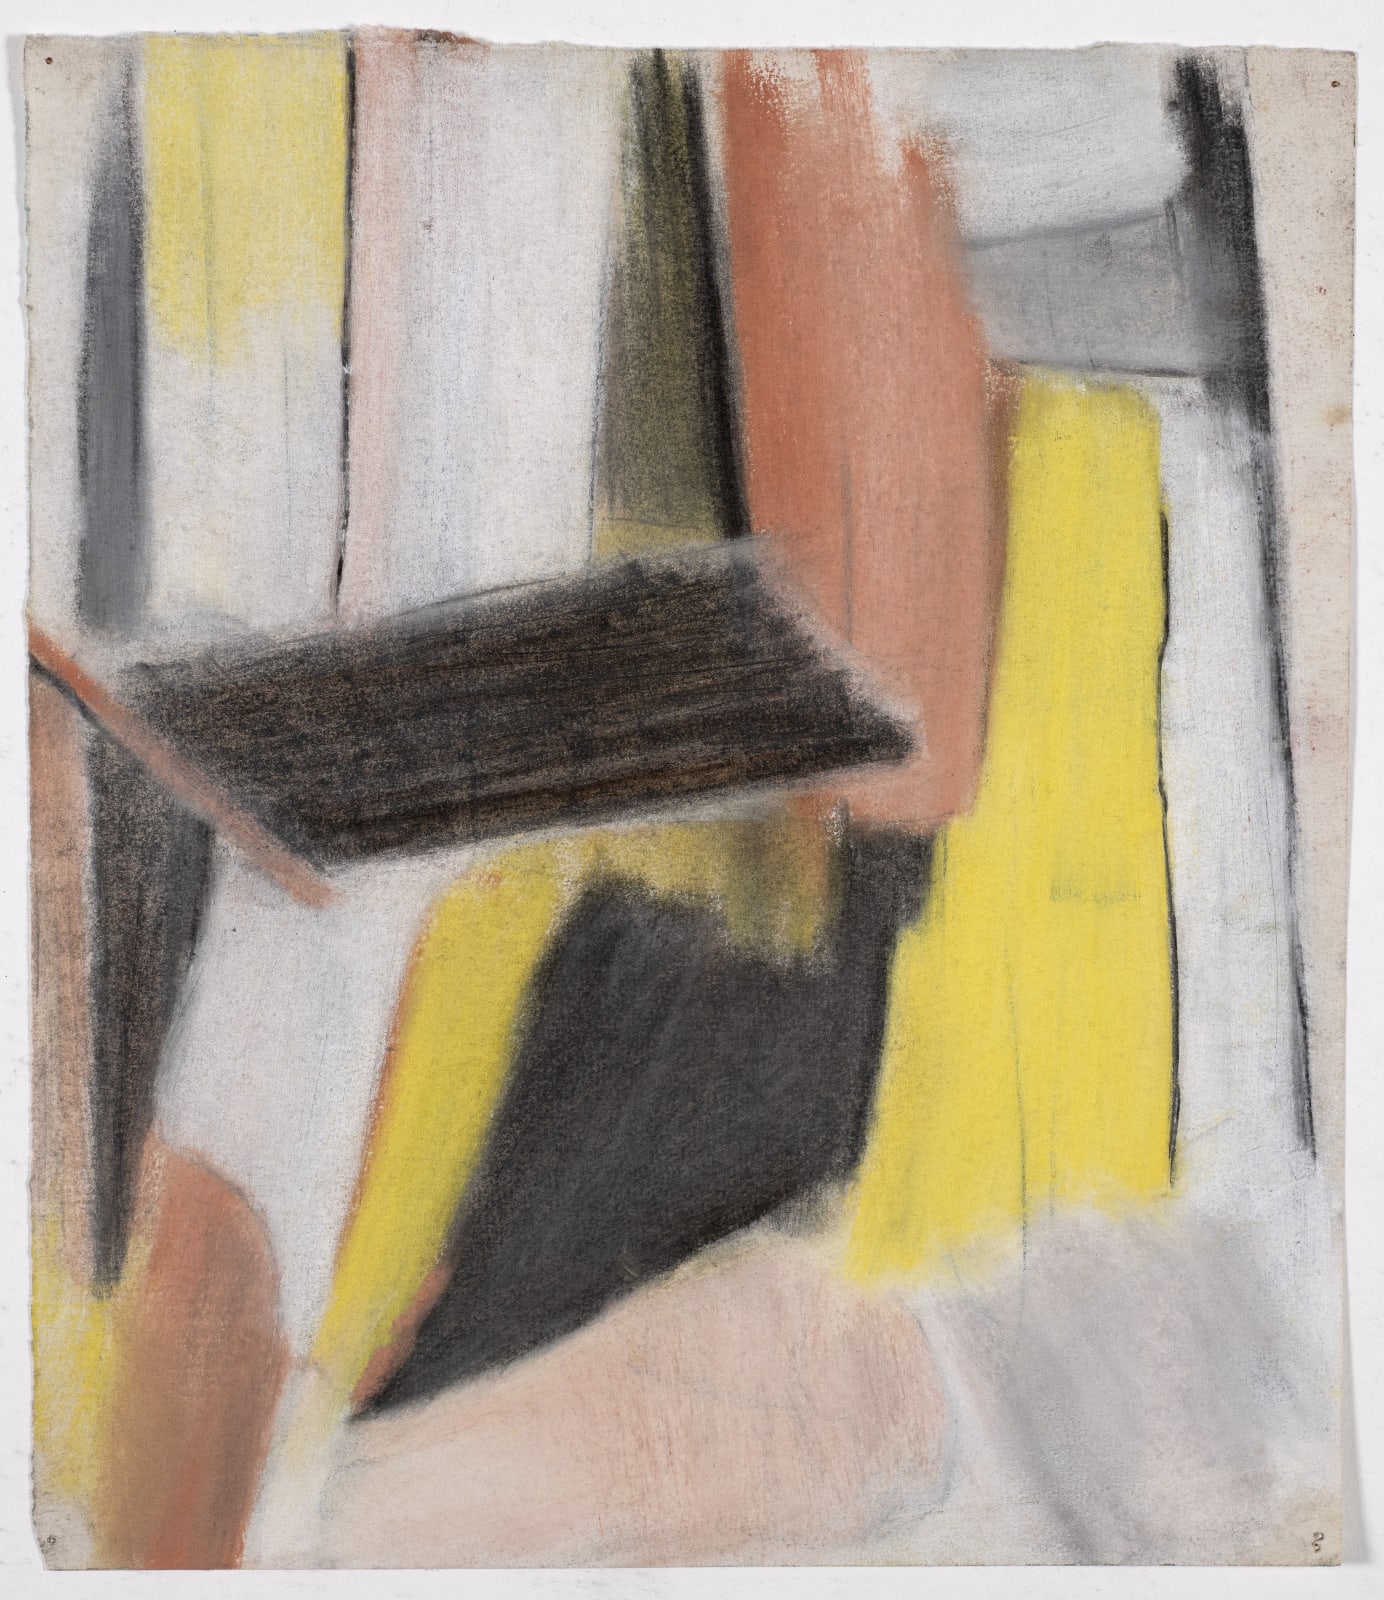 Drawing, c.1953 Coloured chalk on paper 35 x 28cm The Gustav Metzger Foundation